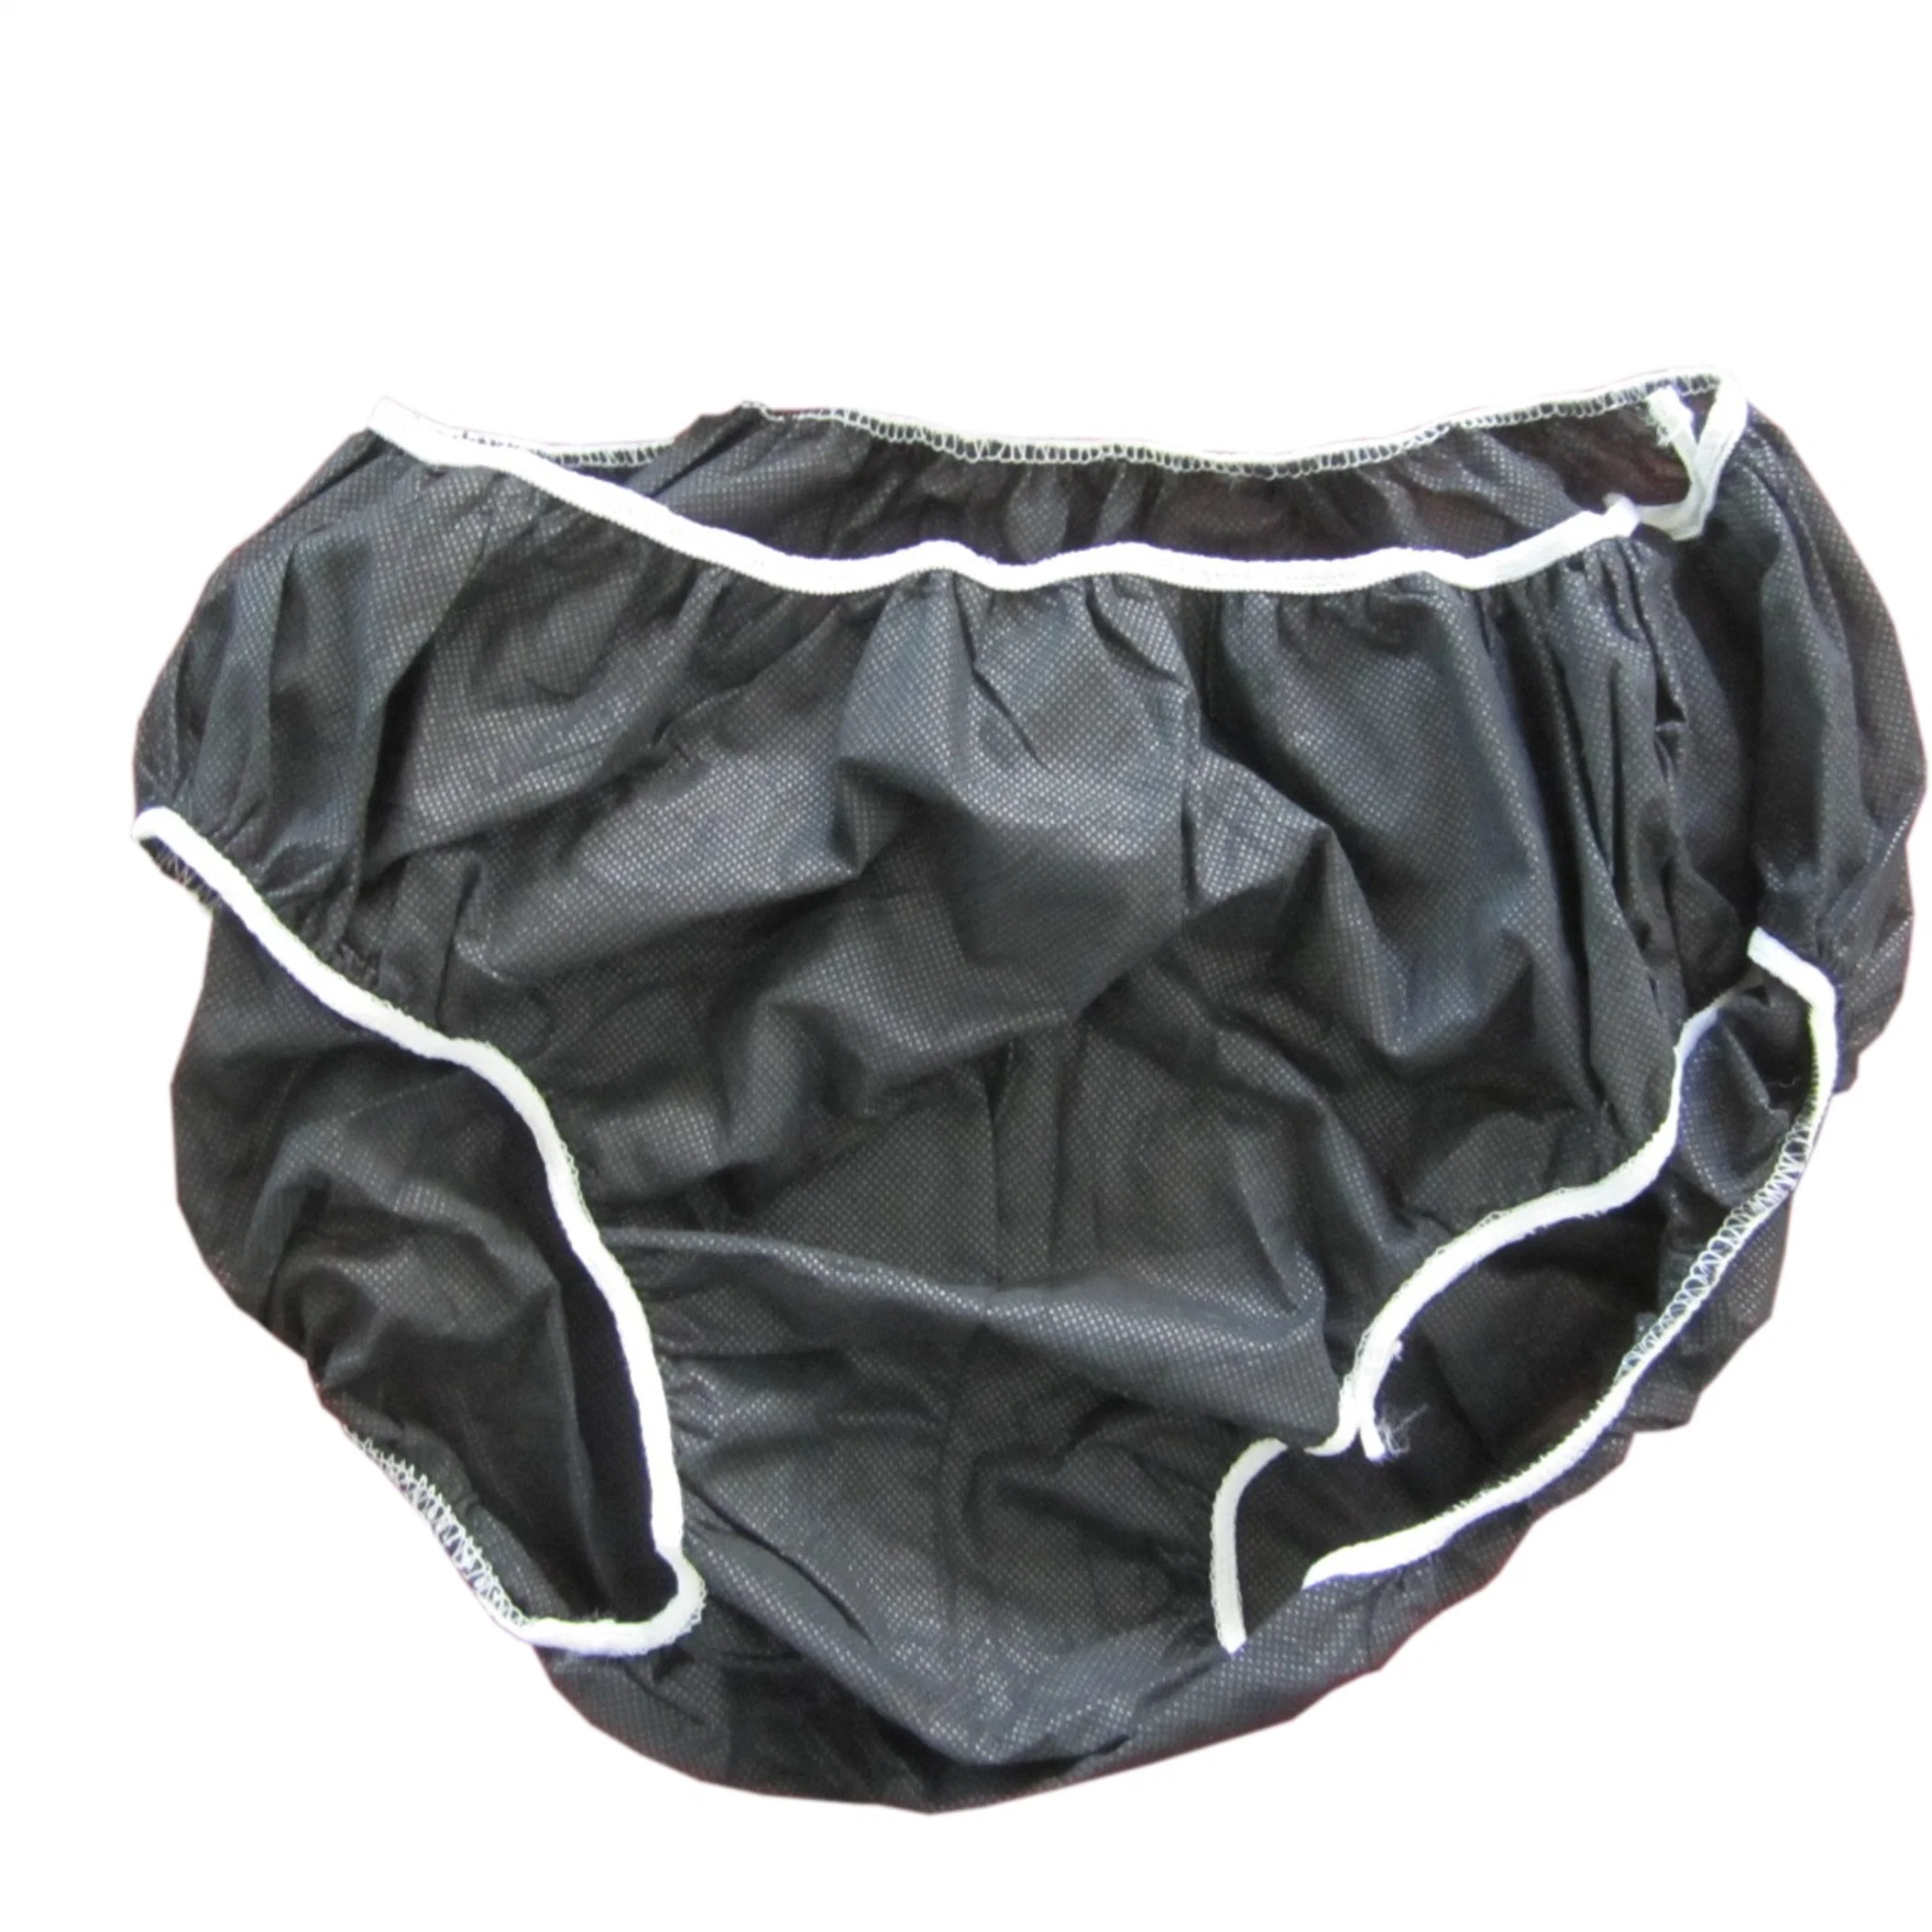 Hot Sell Nonwoven Disposable Panties for Women, Disposable Underwear Ladies Panties